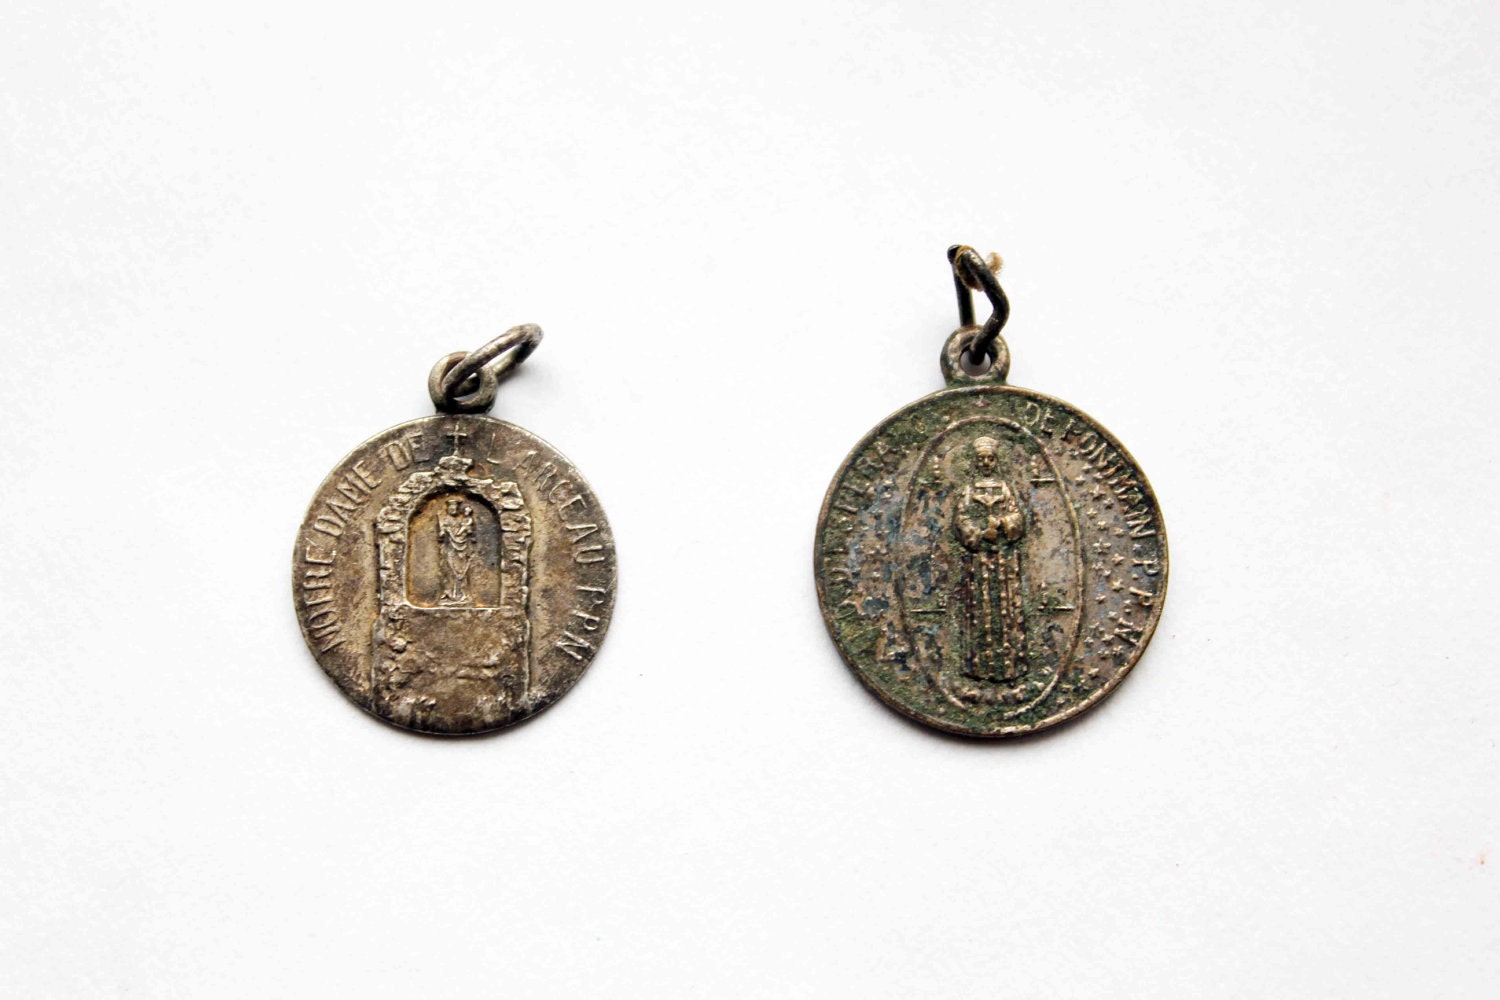 Antique french medal - religious charm - round rosary both sides